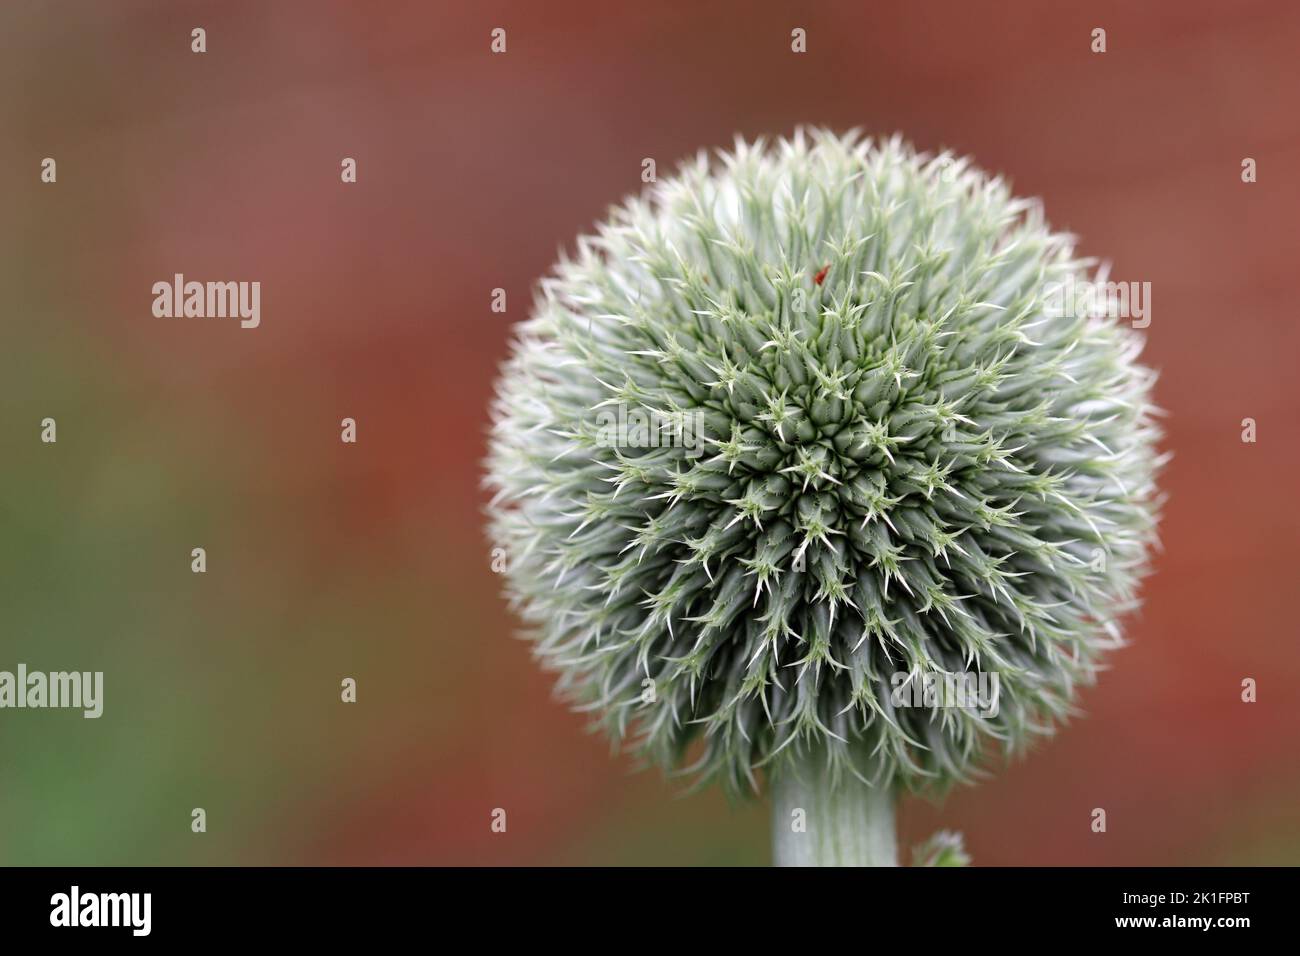 Green and white globe thistle, Echinops species, flower in close up with a blurred brown and green background. Stock Photo